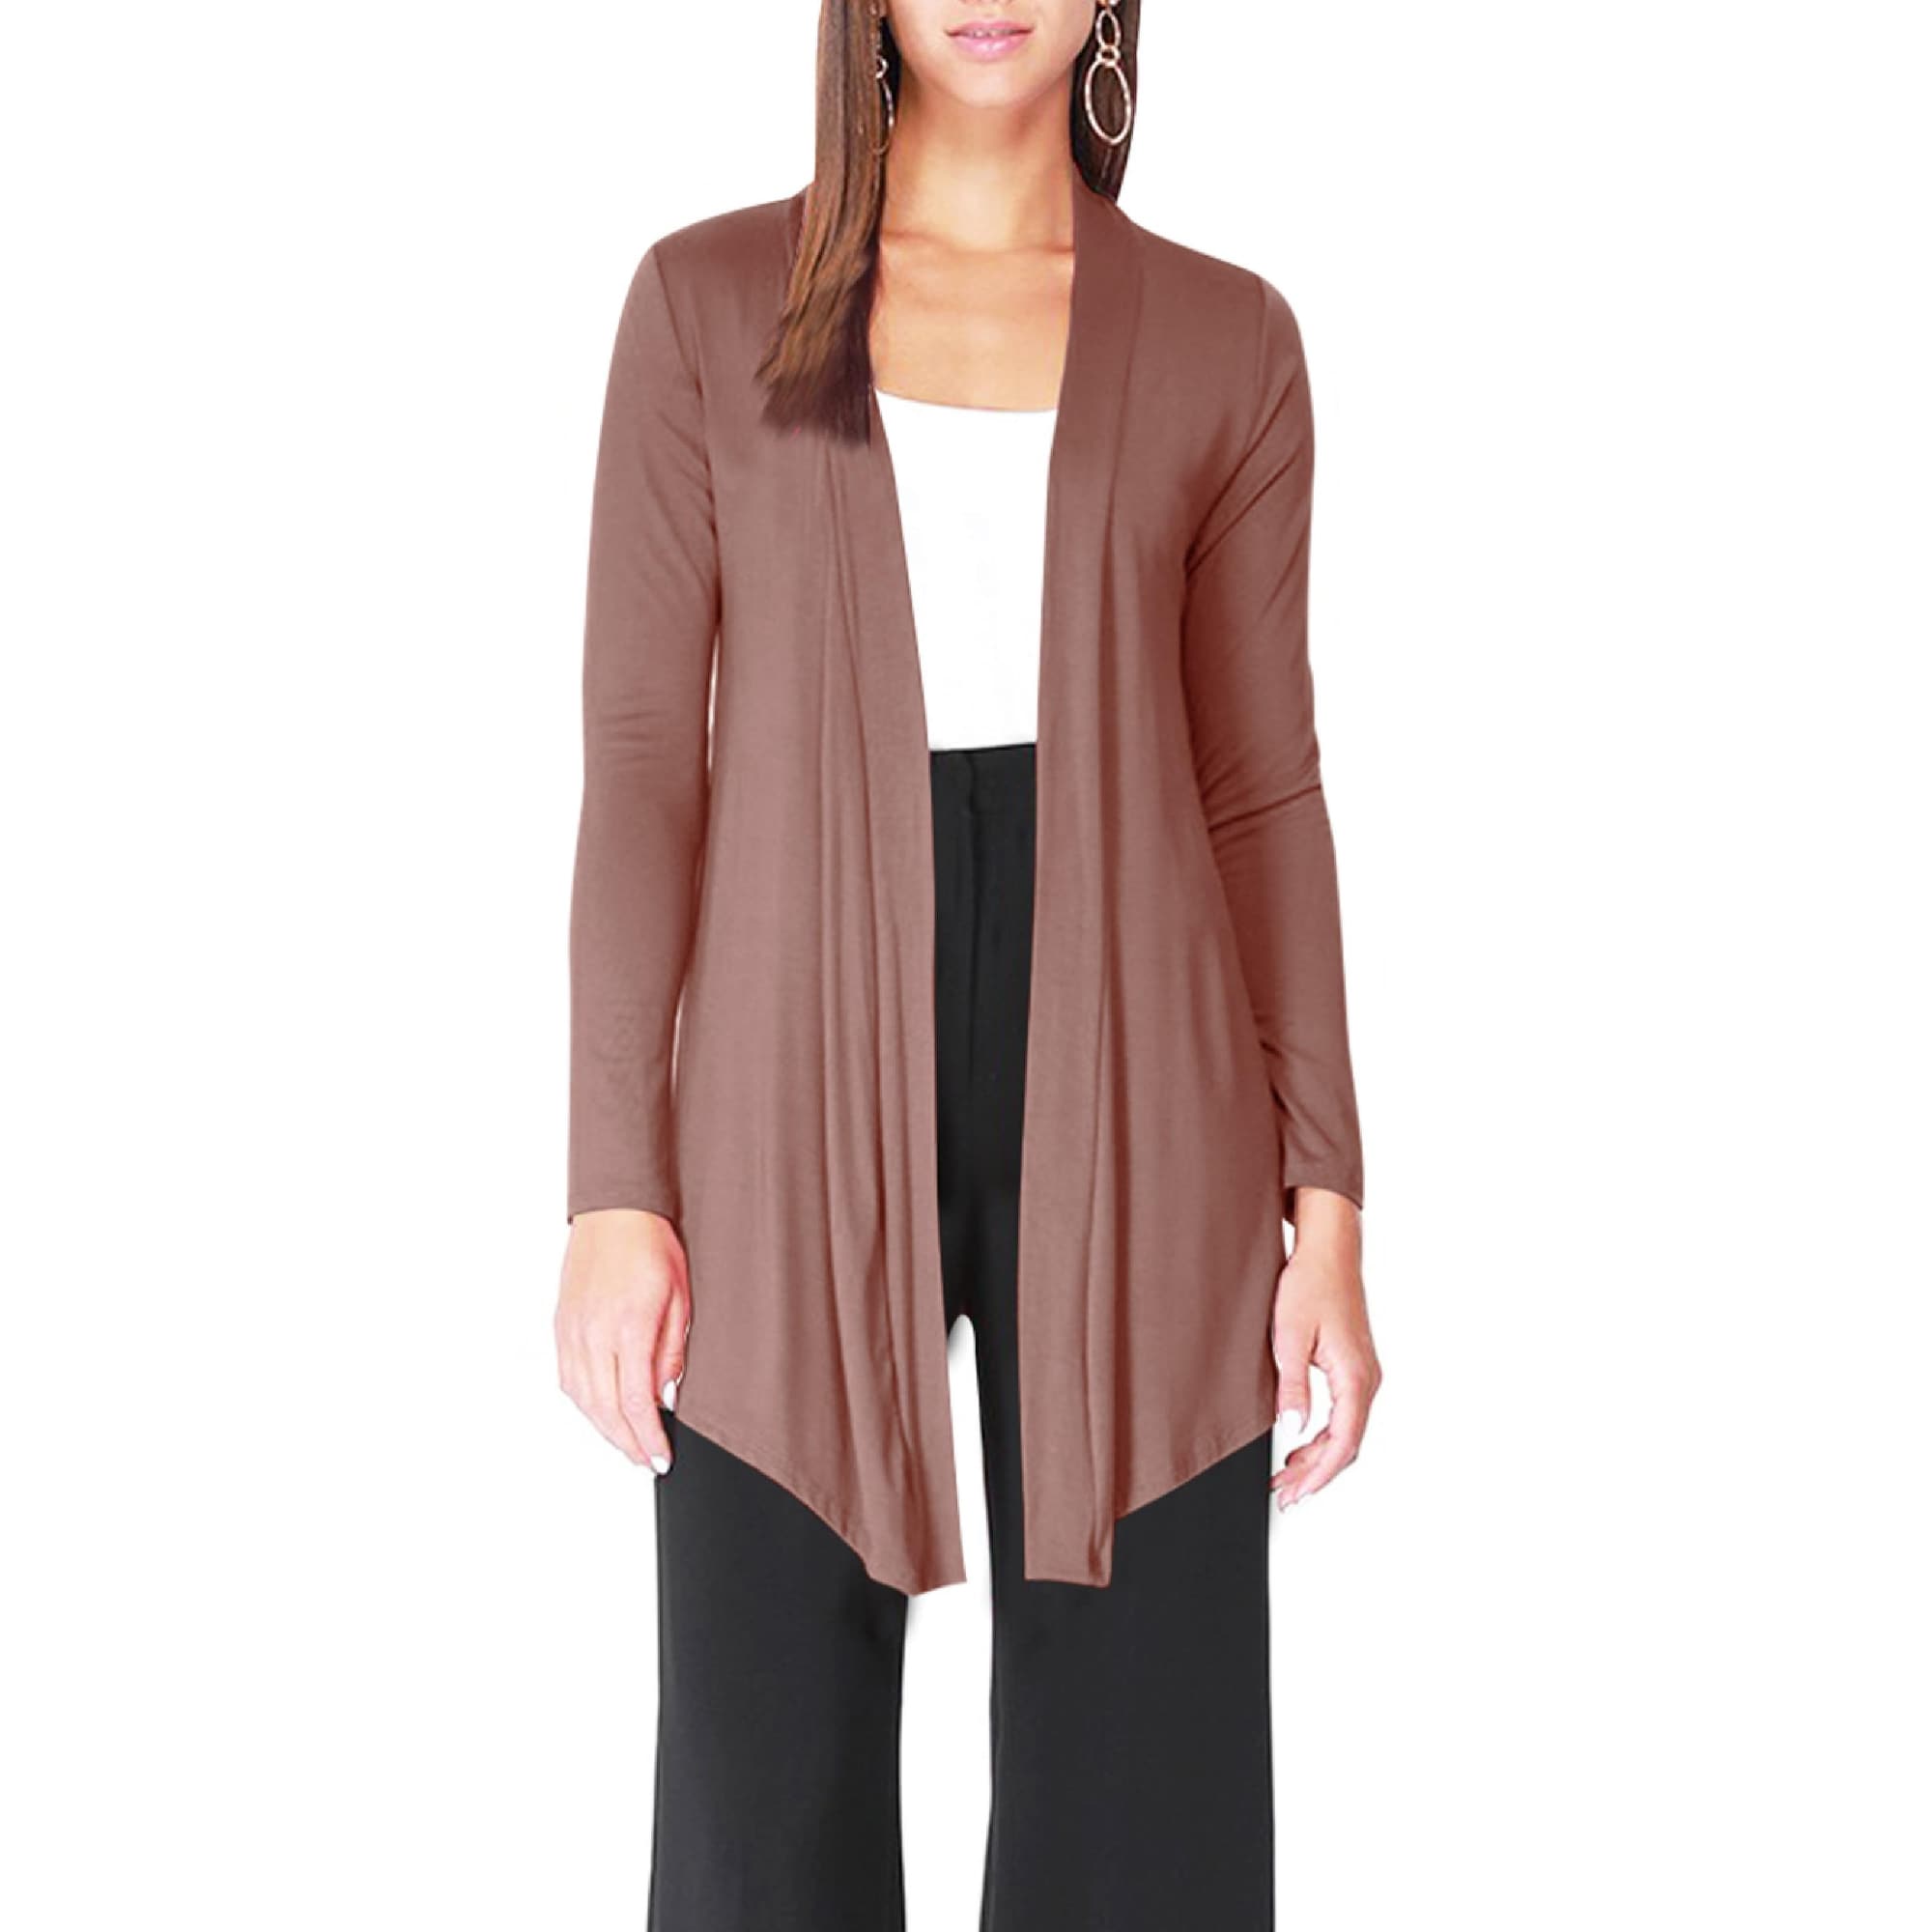 Women's Casual Solid Sweater Cardigan